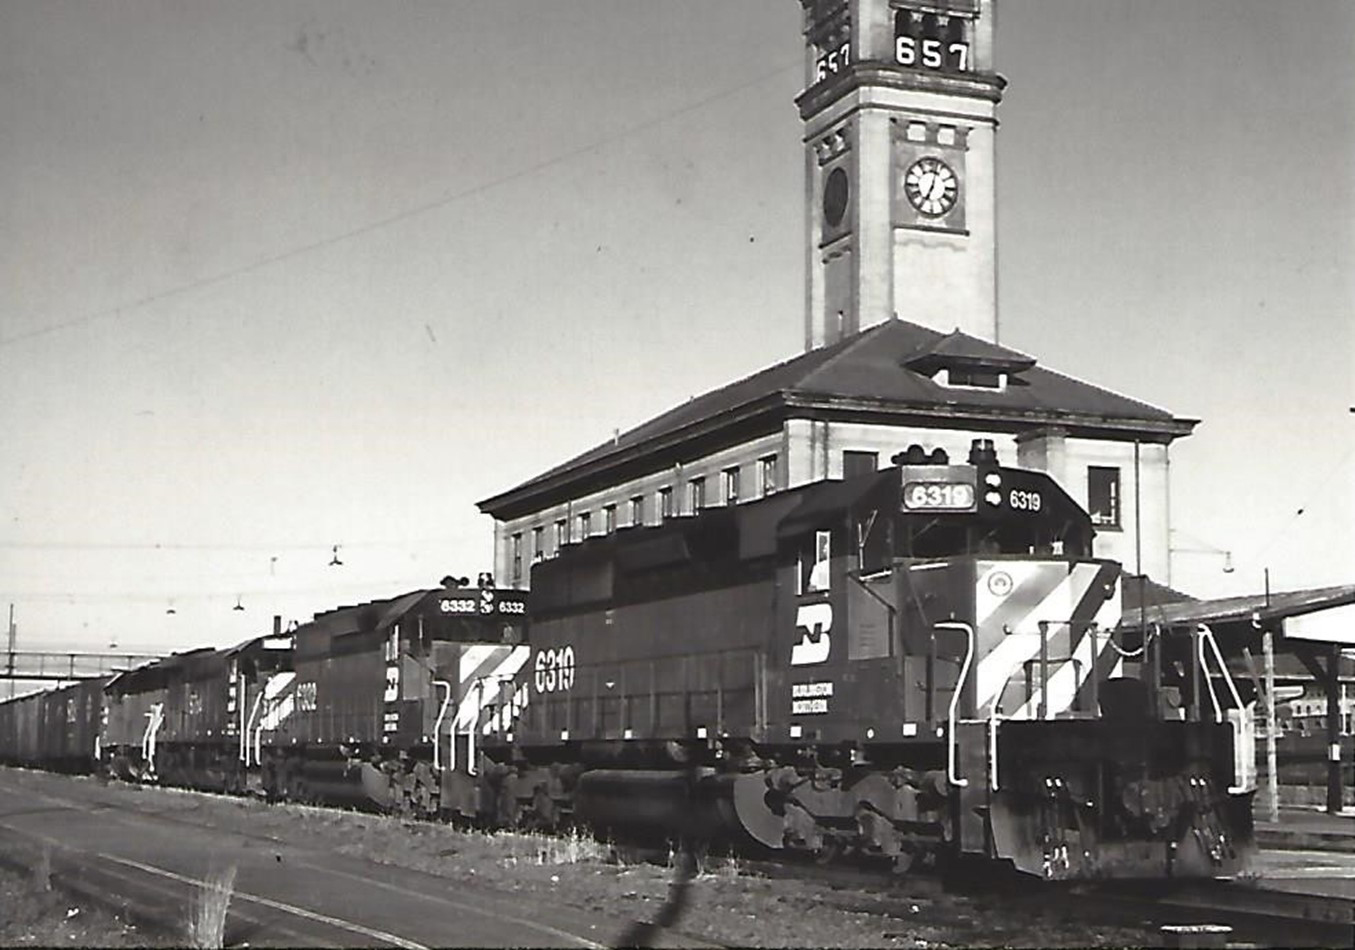  A Burlington Northern train at the Great Northern depot and clock tower, circa 1972. The “657” on the clock tower is a countdown clock, indicating 657 days until the start of the World’s Fair/Expo.